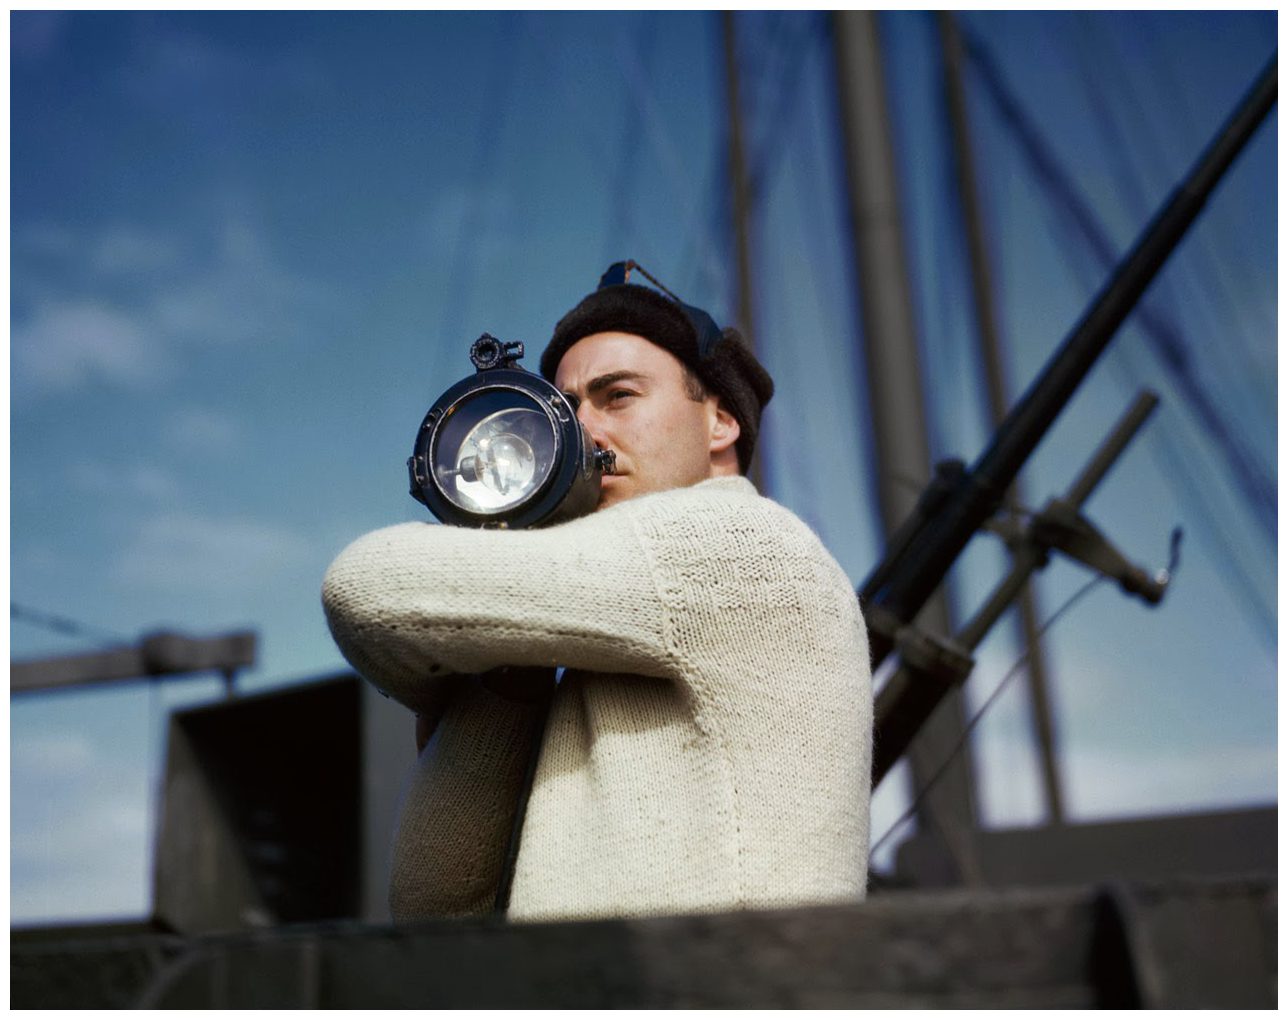 a-crewman-signals-another-ship-of-an-allied-convoy-across-the-atlantic-from-the-us-to-england-1942-photo-robert-capa